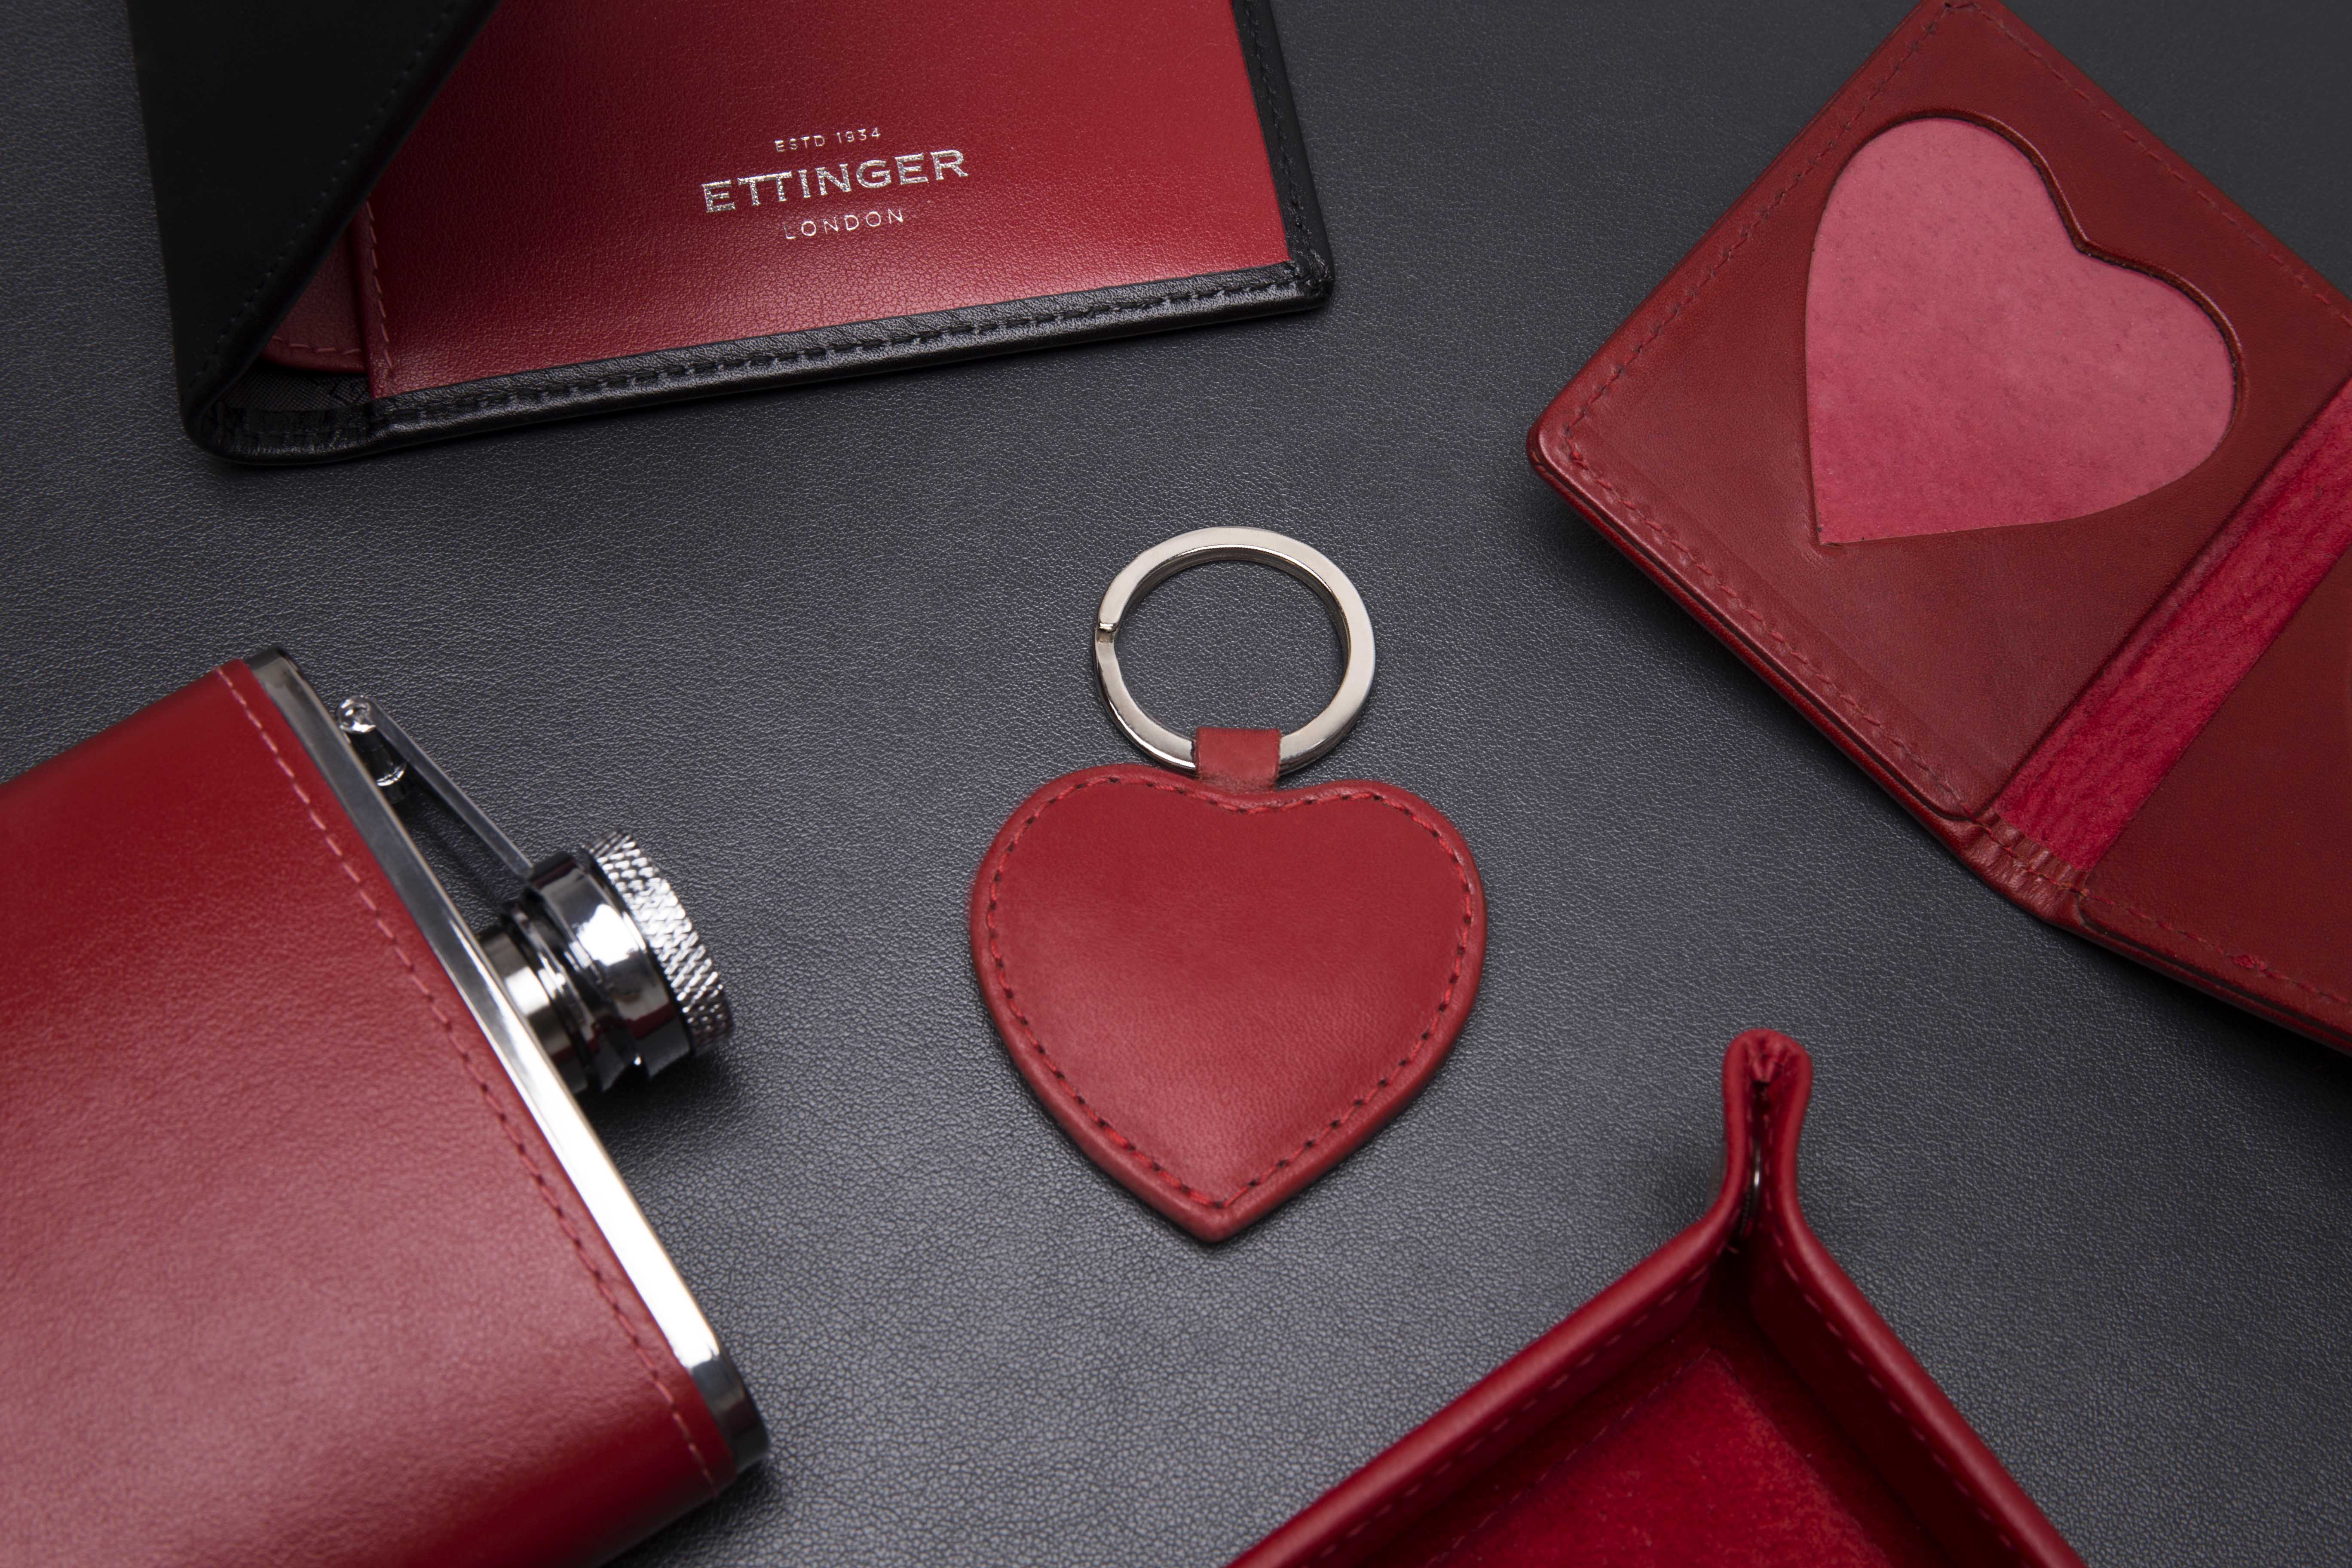 Valentines Day Gifting, valentines day gifts, gifts for valentines day, ettinger valentines day, ettinger gifts, leather goods, leather accessories